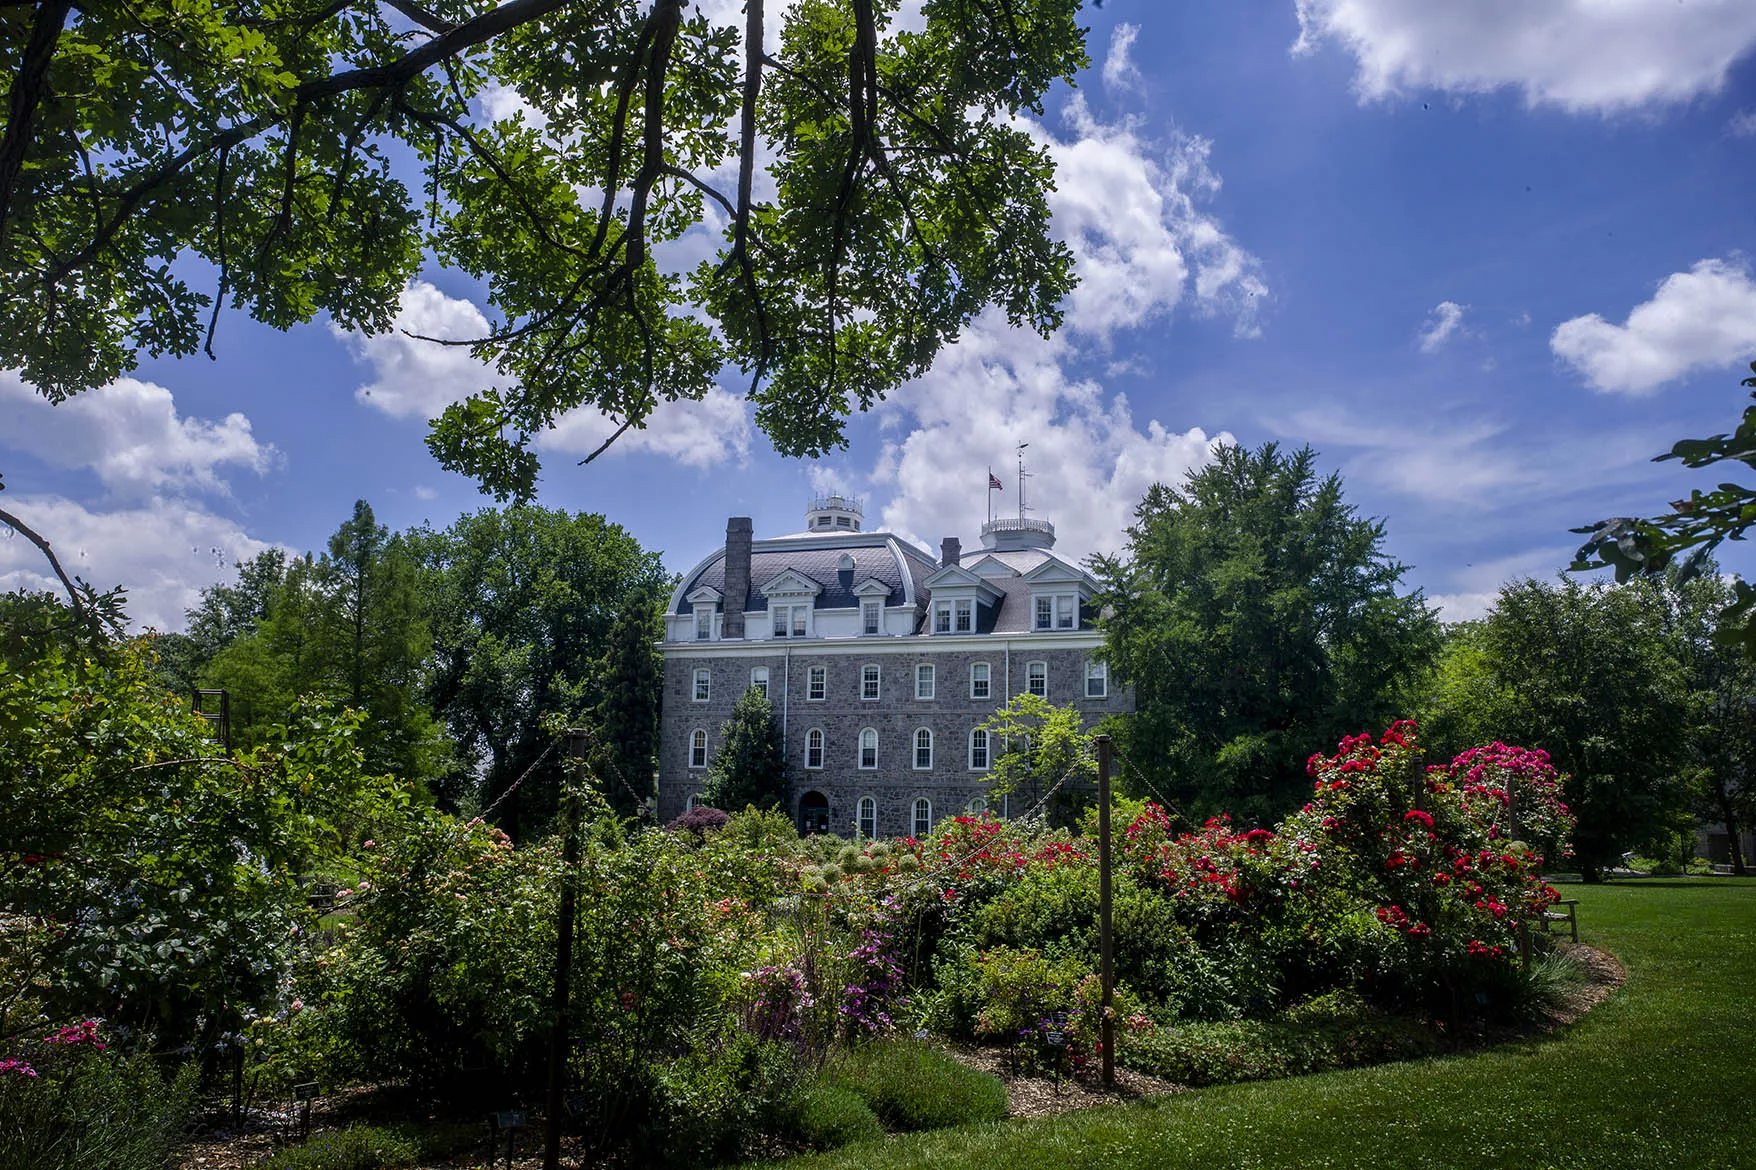 Parrish Hall in the Springtime